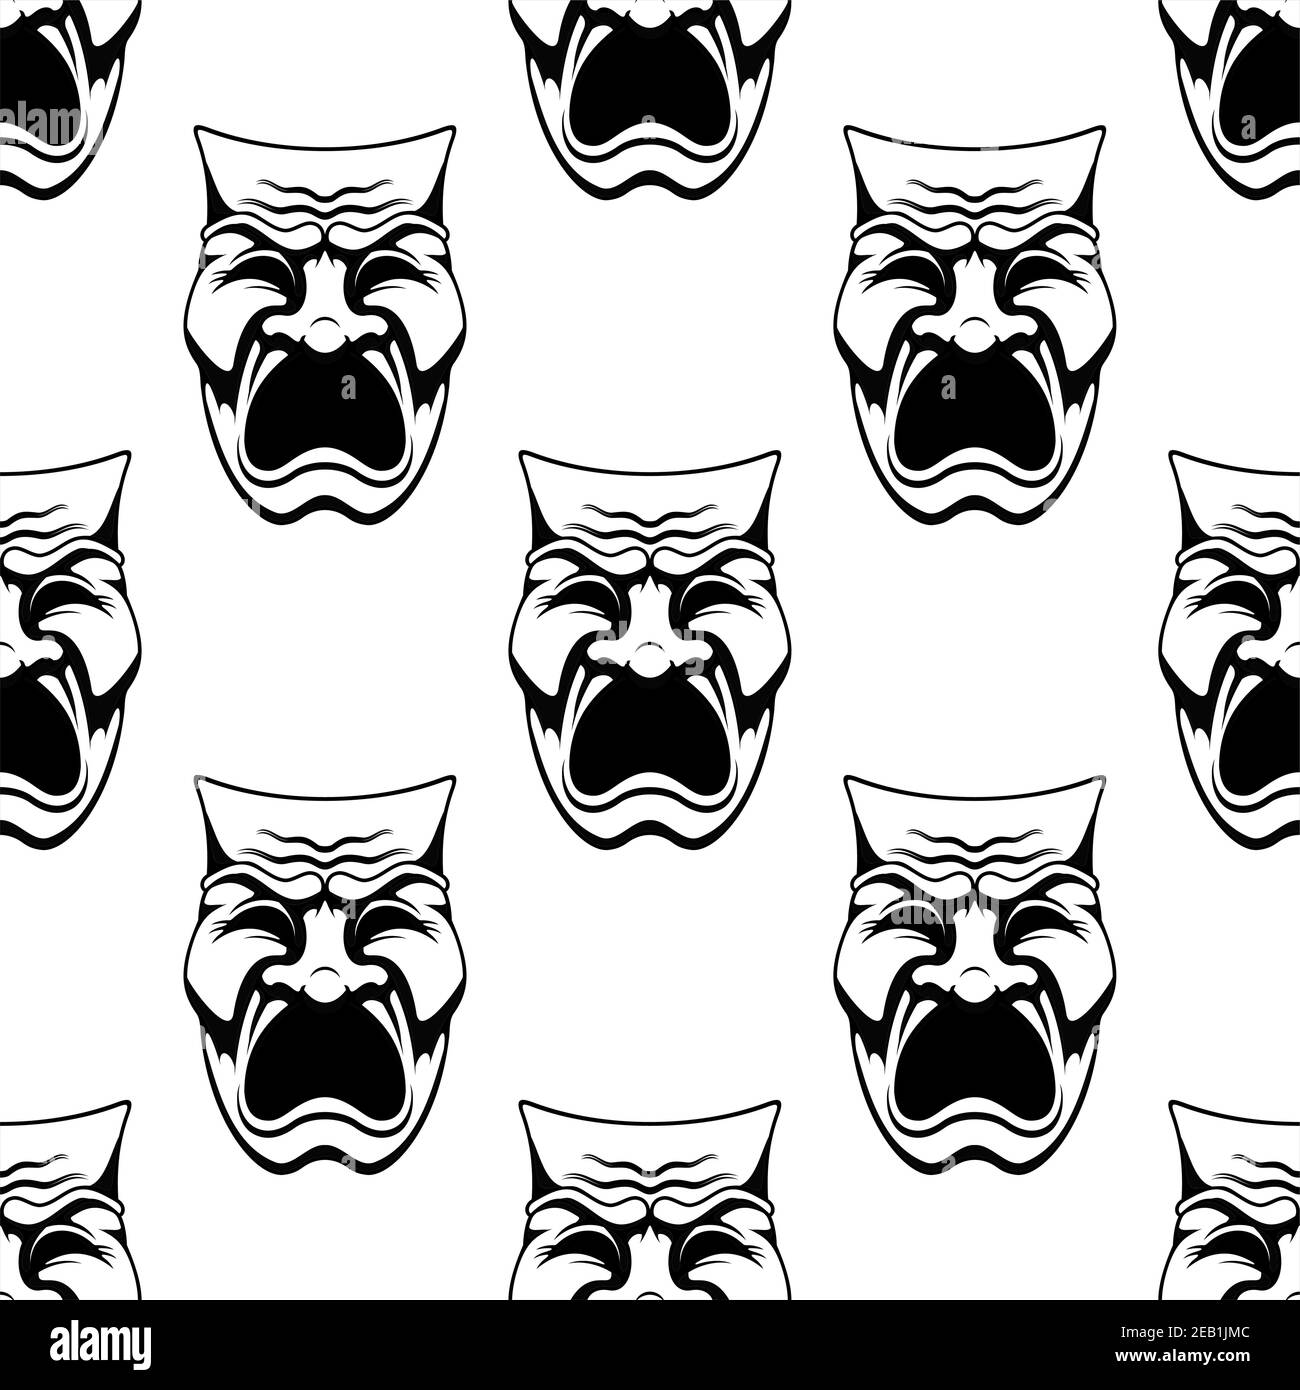 Seamless theater or masquerade masks background with dramatic crying face in doodle sketch style suitable for costume party or entertainment decoratio Stock Vector